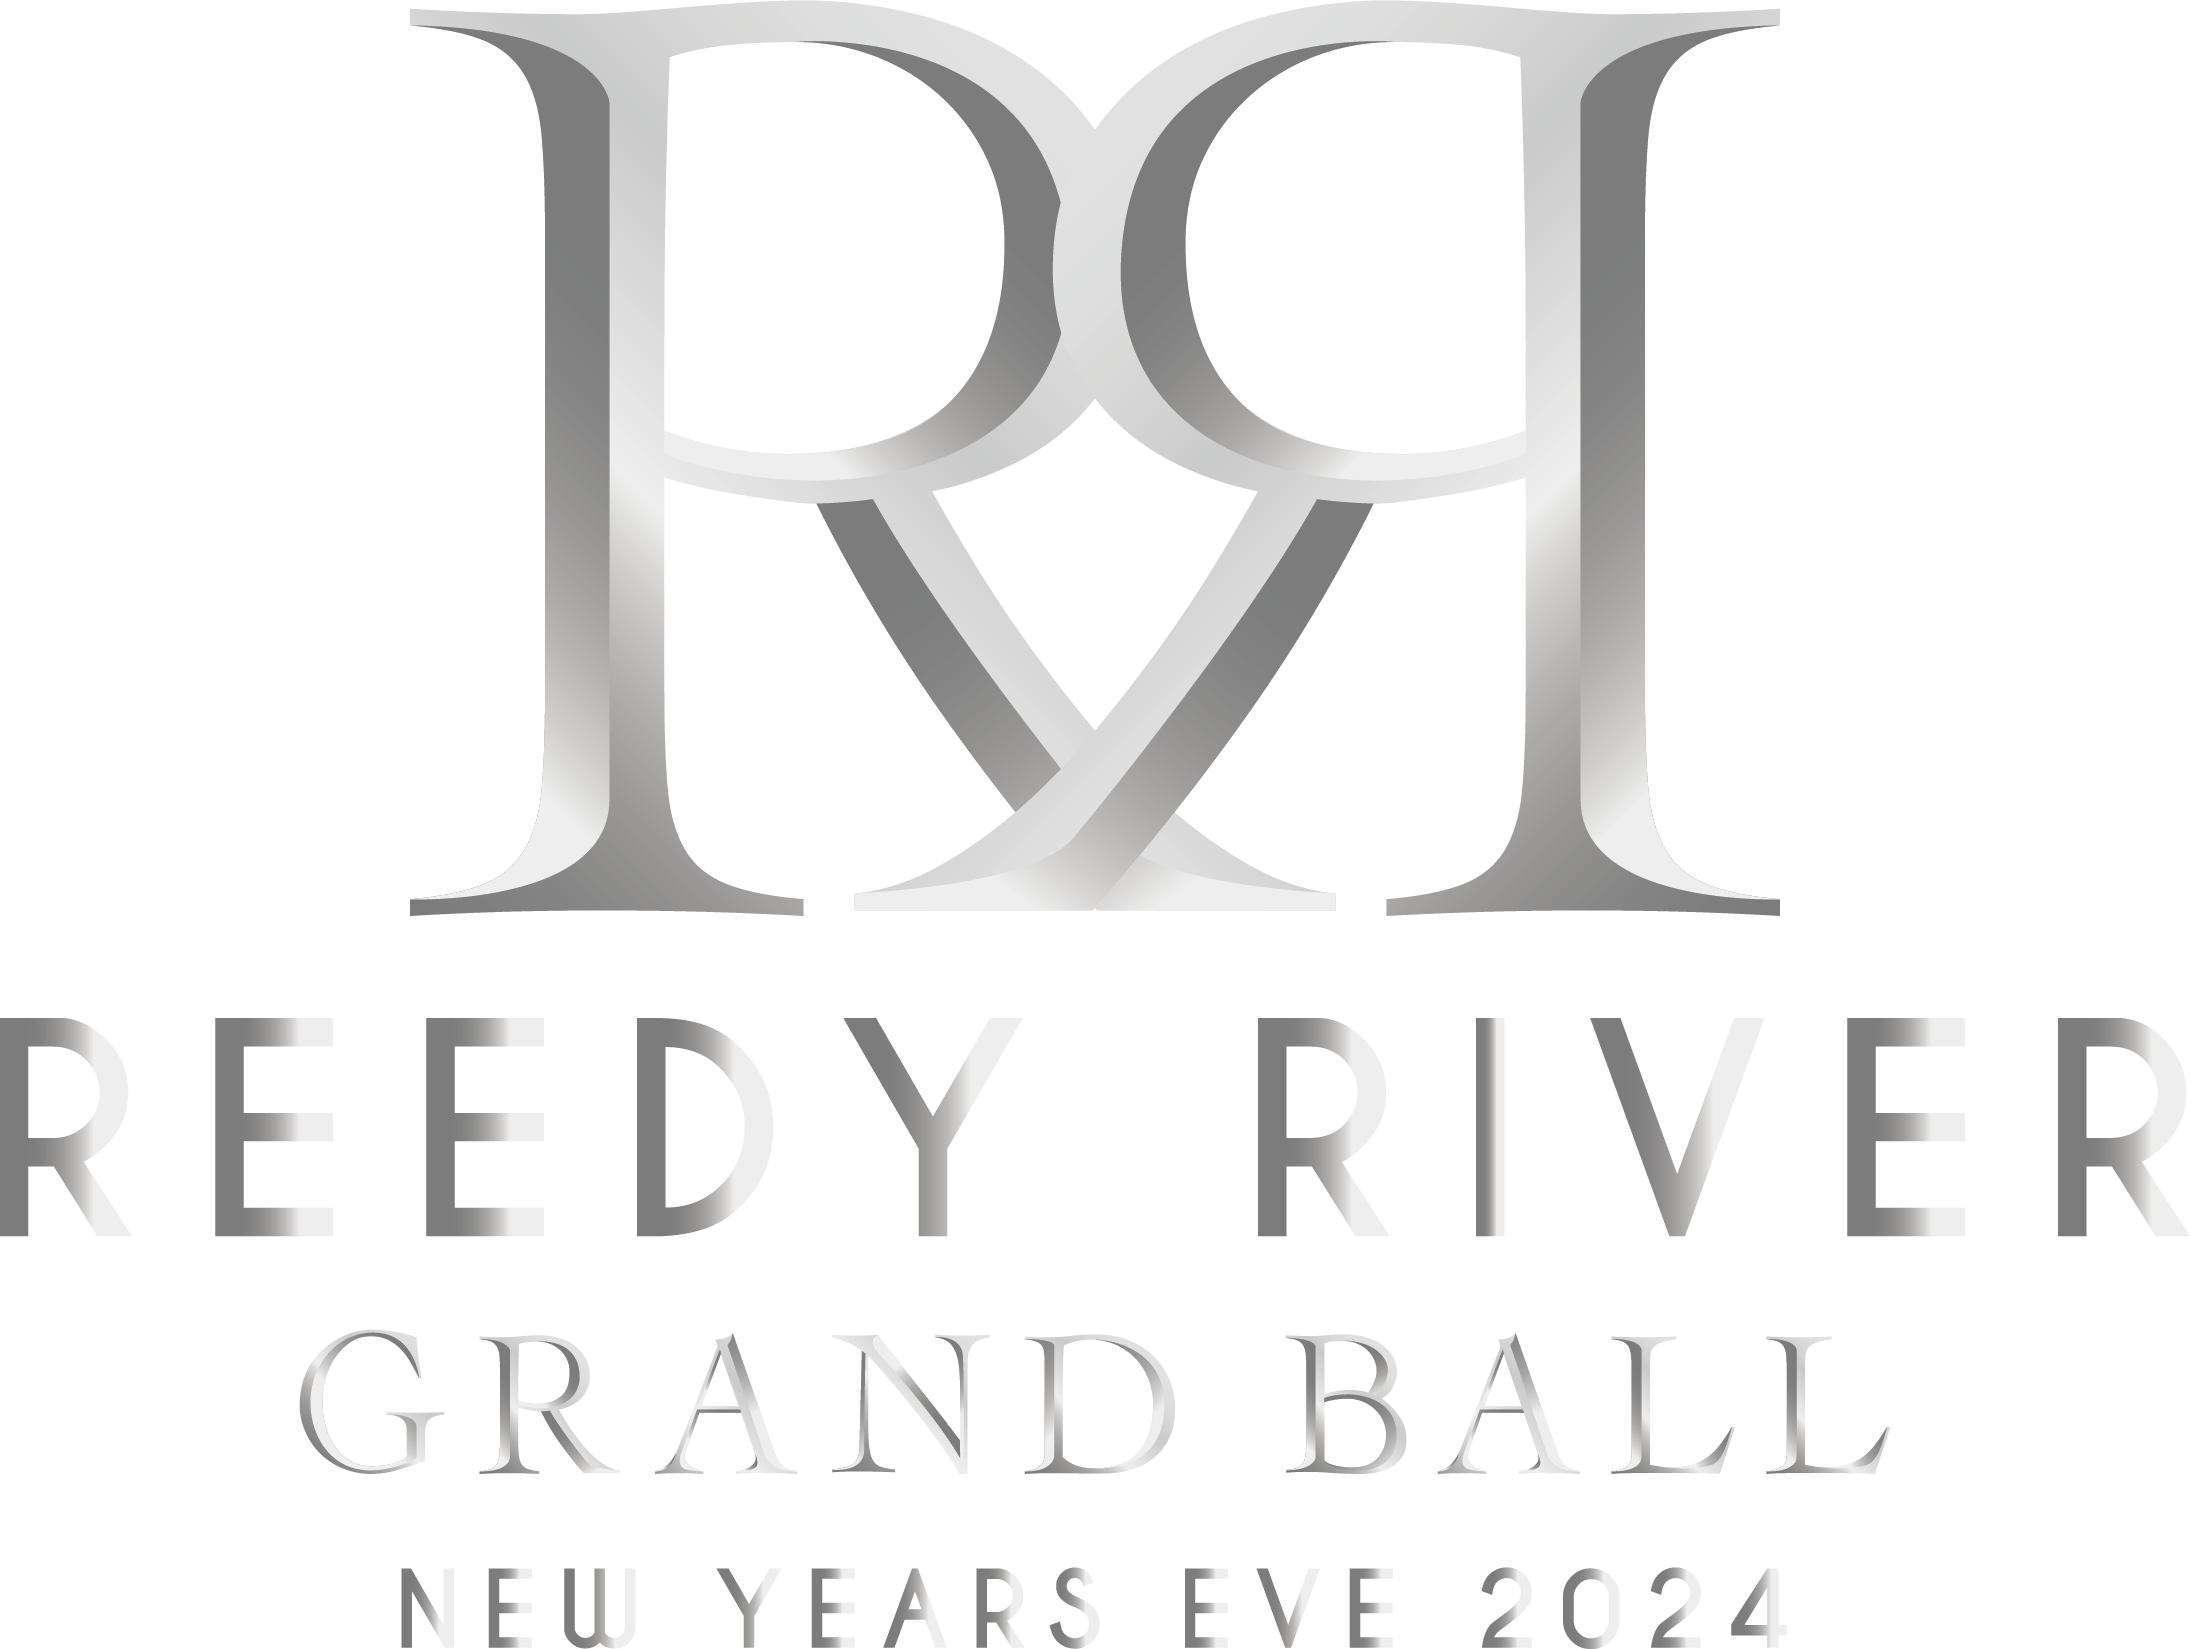 Reedy River Grand Ball New Years Eve 2024